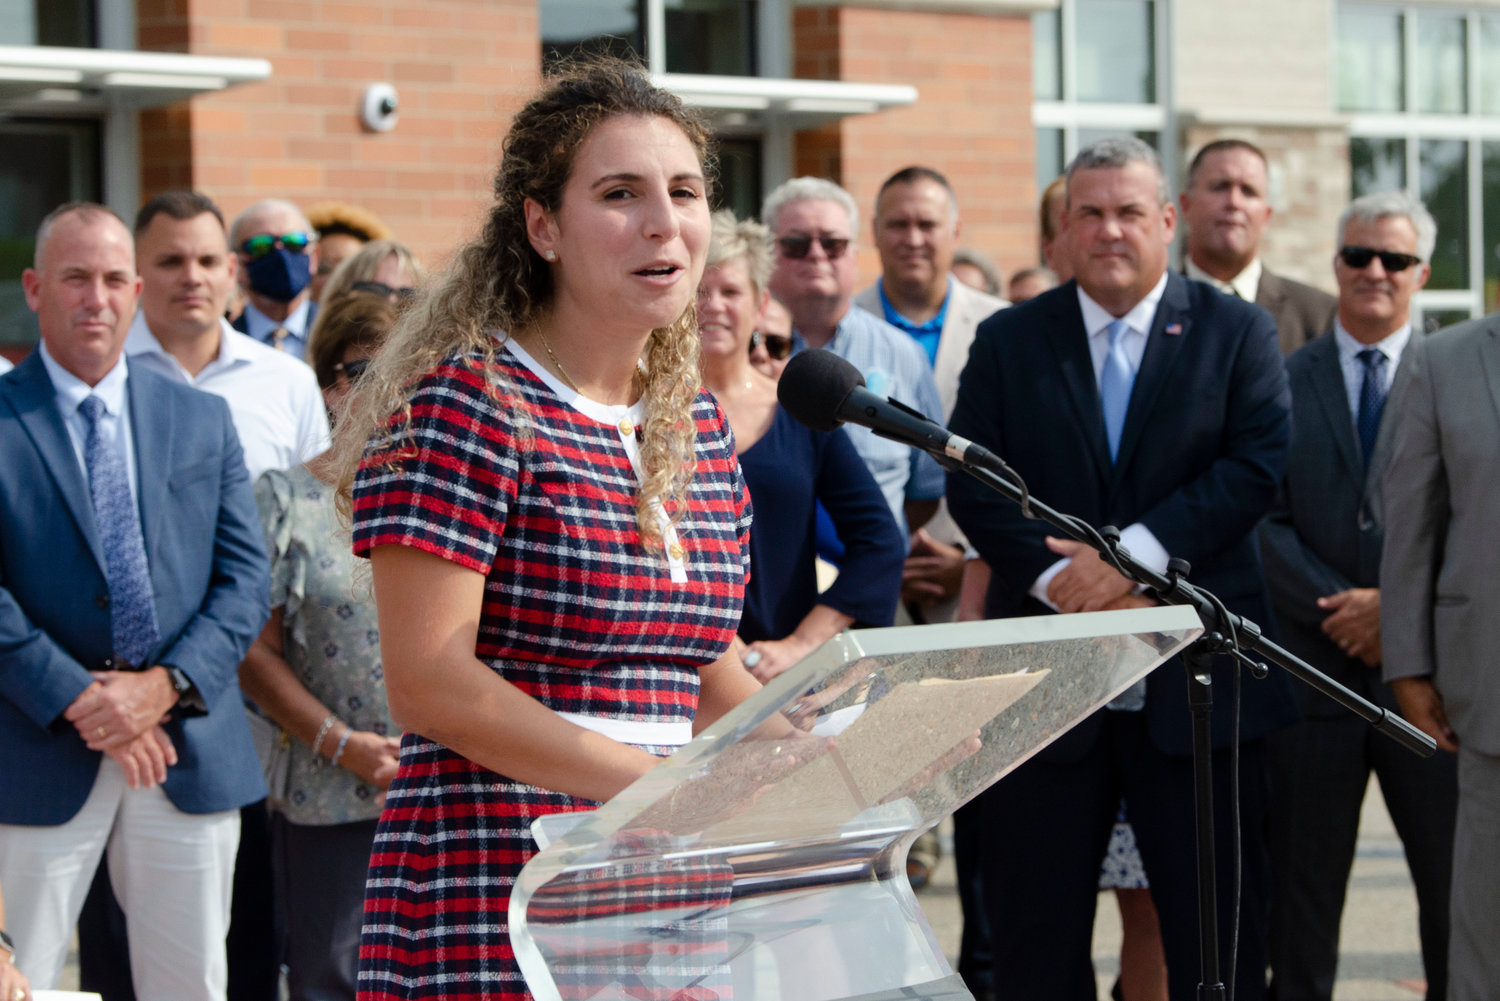 State Representative Katherine Kazarian (D-District 63) speaks during the announcement.